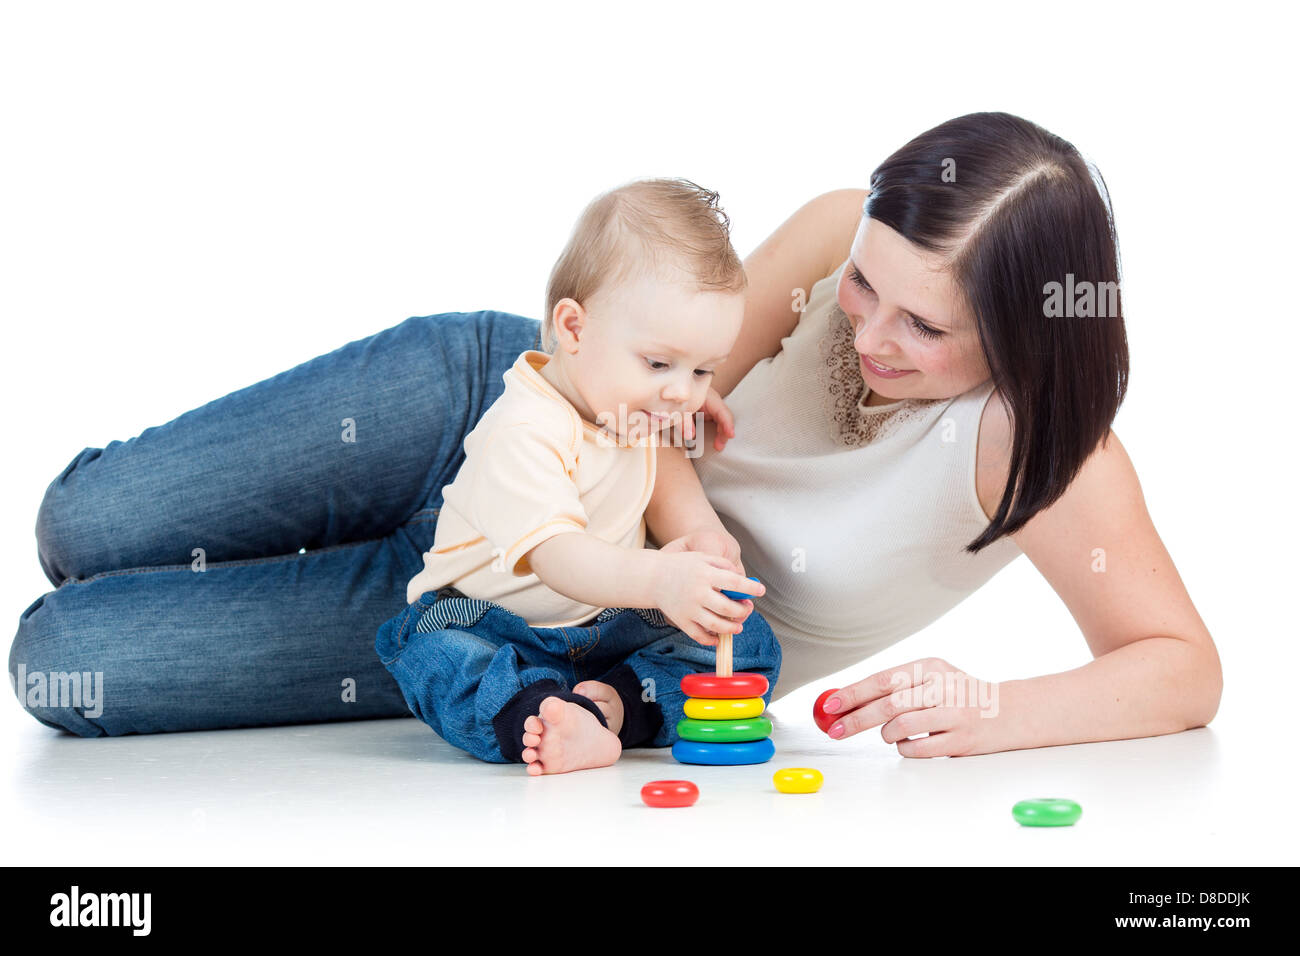 mother and baby play pyramid toy Stock Photo